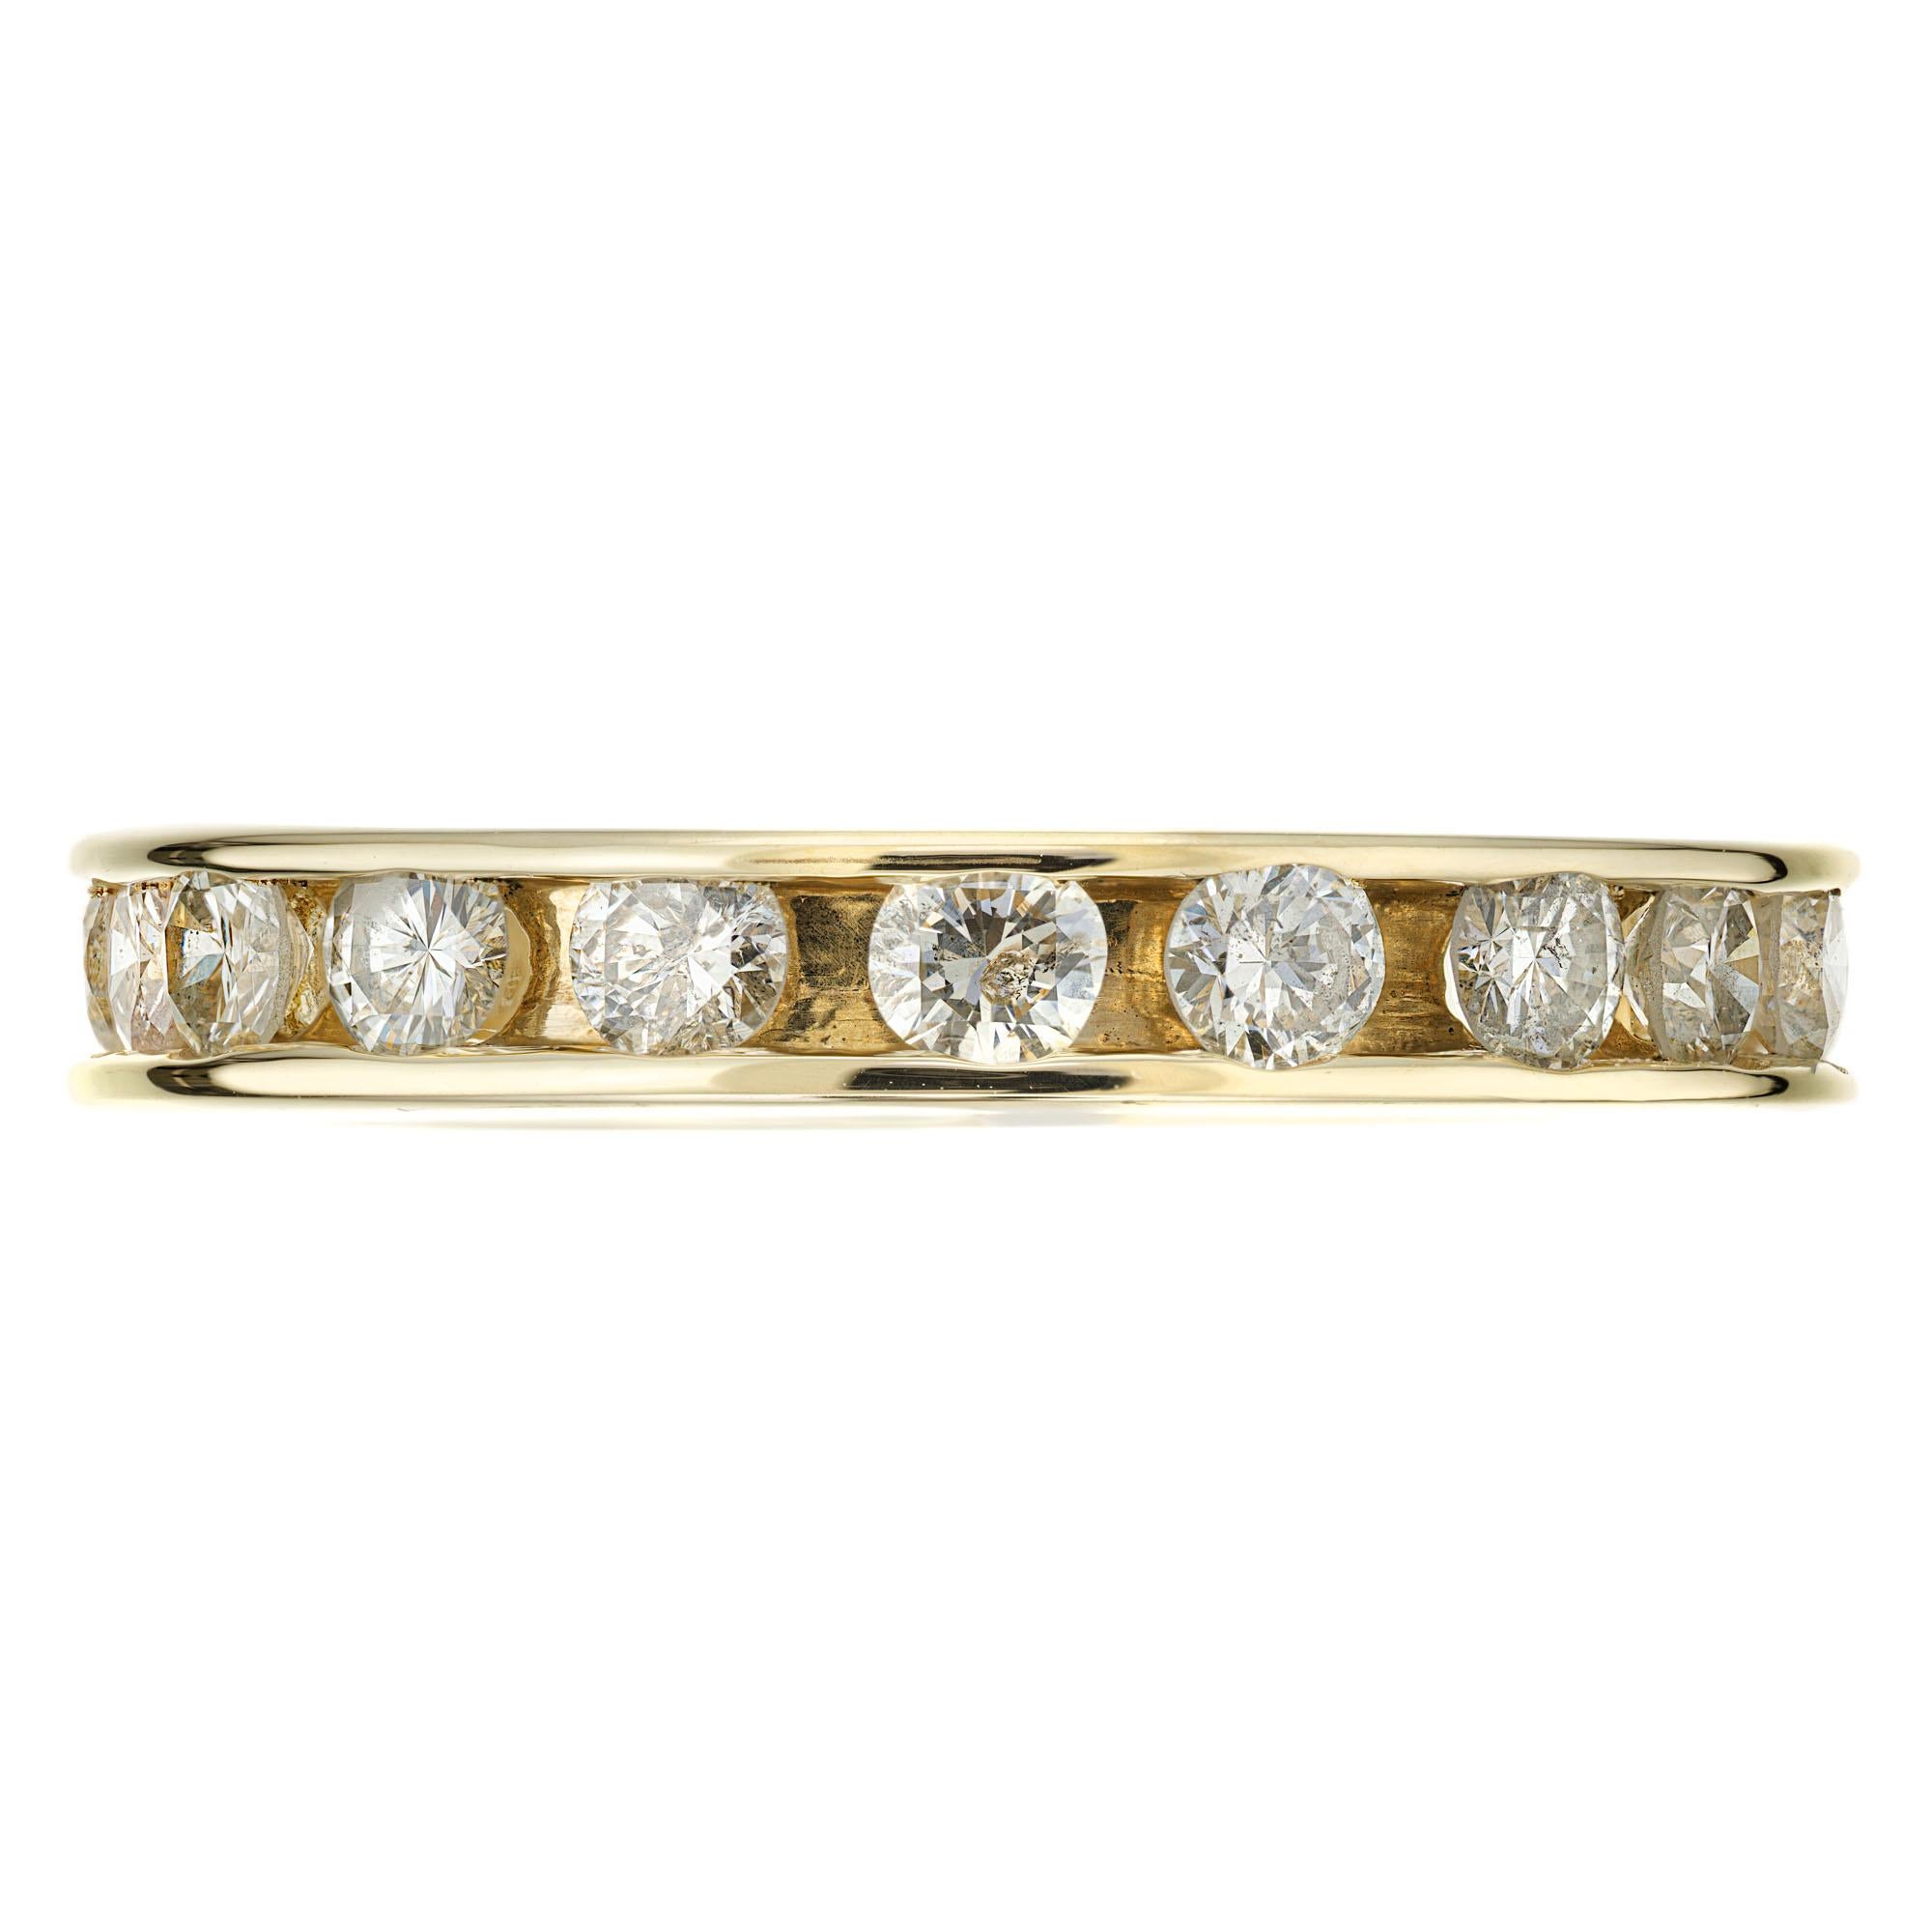 Channel set Diamond Eternity wedding band ring. 19 round full cut diamonds set in a 14k yellow gold setting.  

19 round full cut Diamonds, approx. total weight 1.15cts, I, SI1 – I1
Size 5.75 and not sizable
14k yellow gold
Tested: 14k
3.6